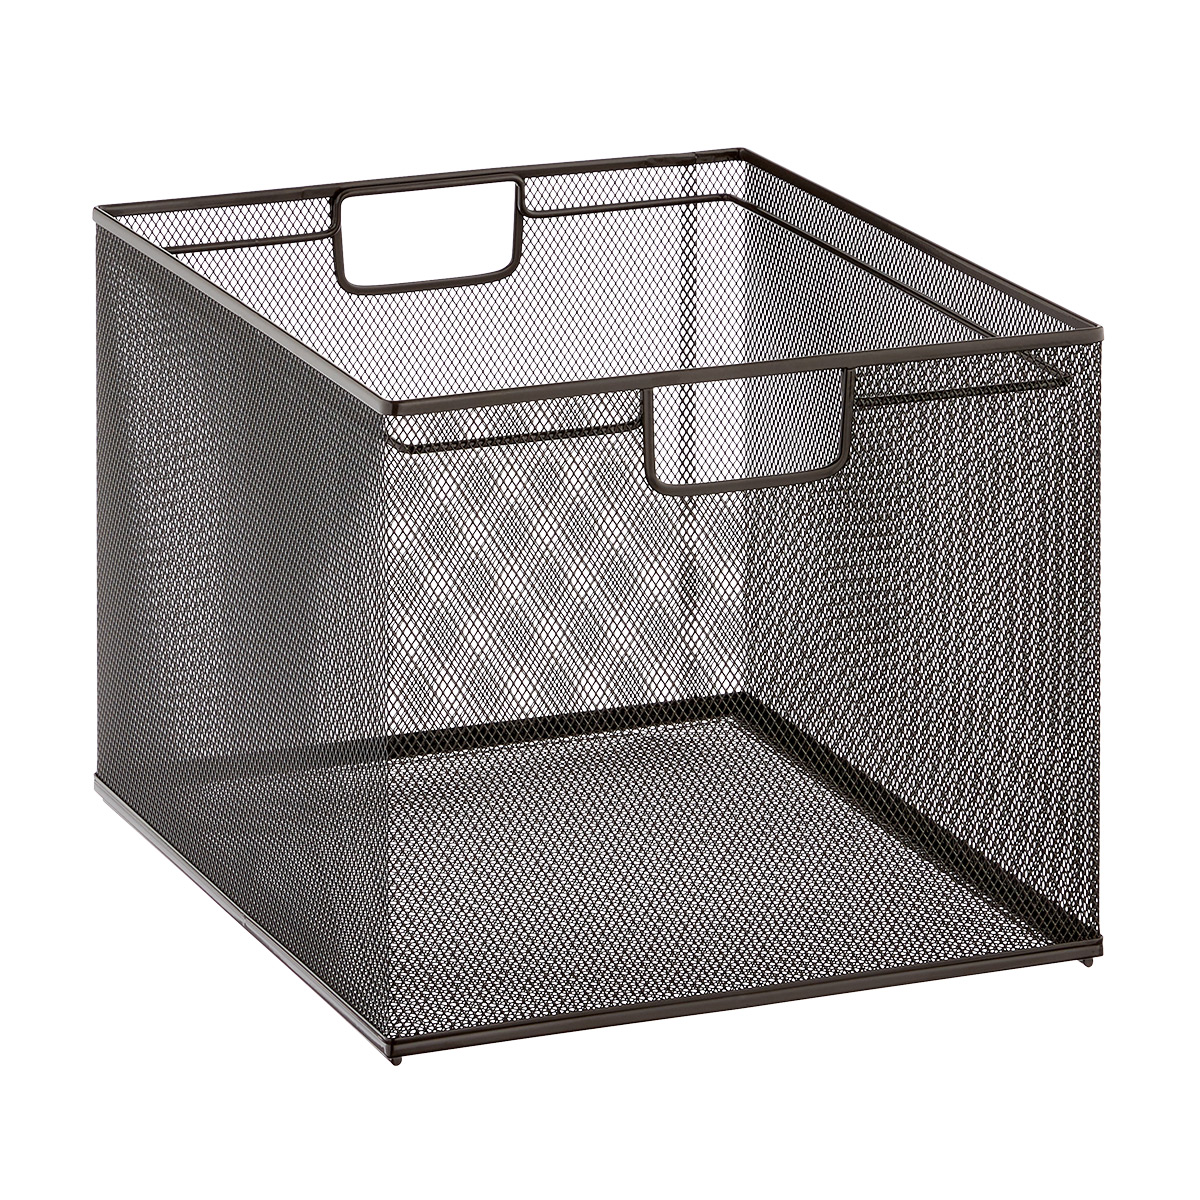 Graphite Mesh Stackable File Crate | The Container Store